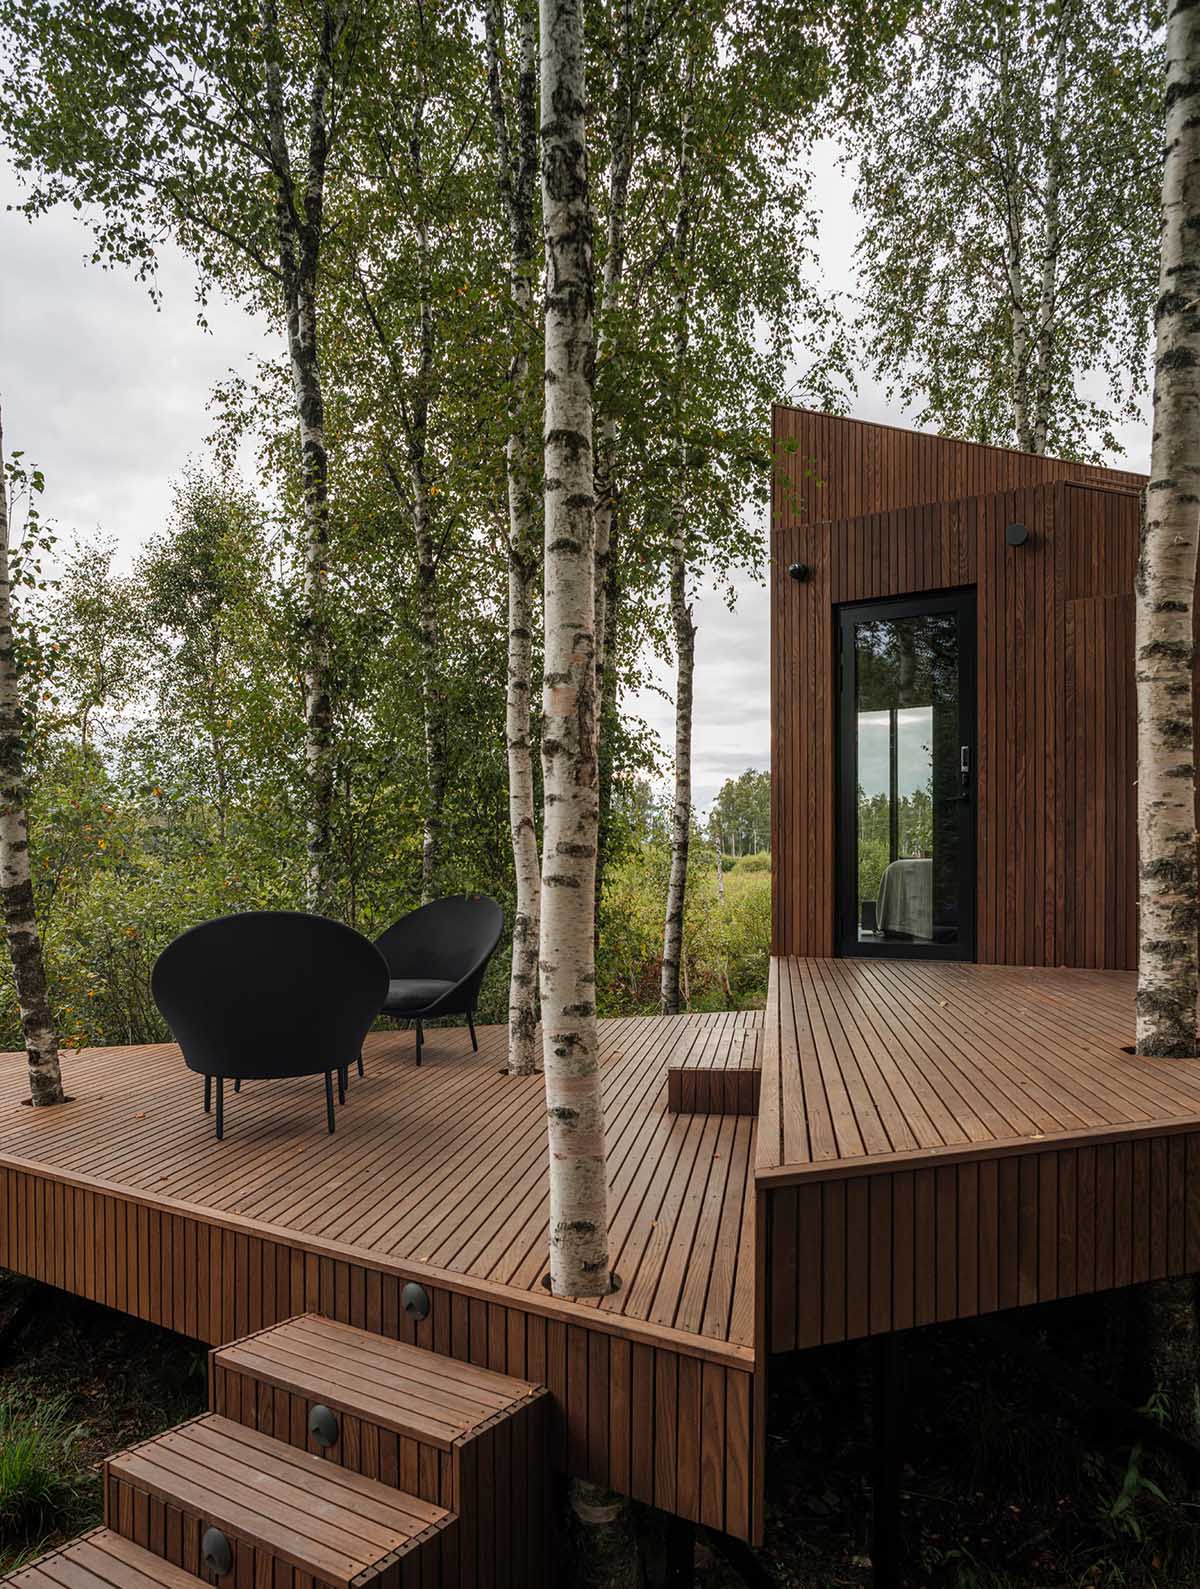 This modern wood deck, which has birch trees growing through it, expands the living space of the cabin.